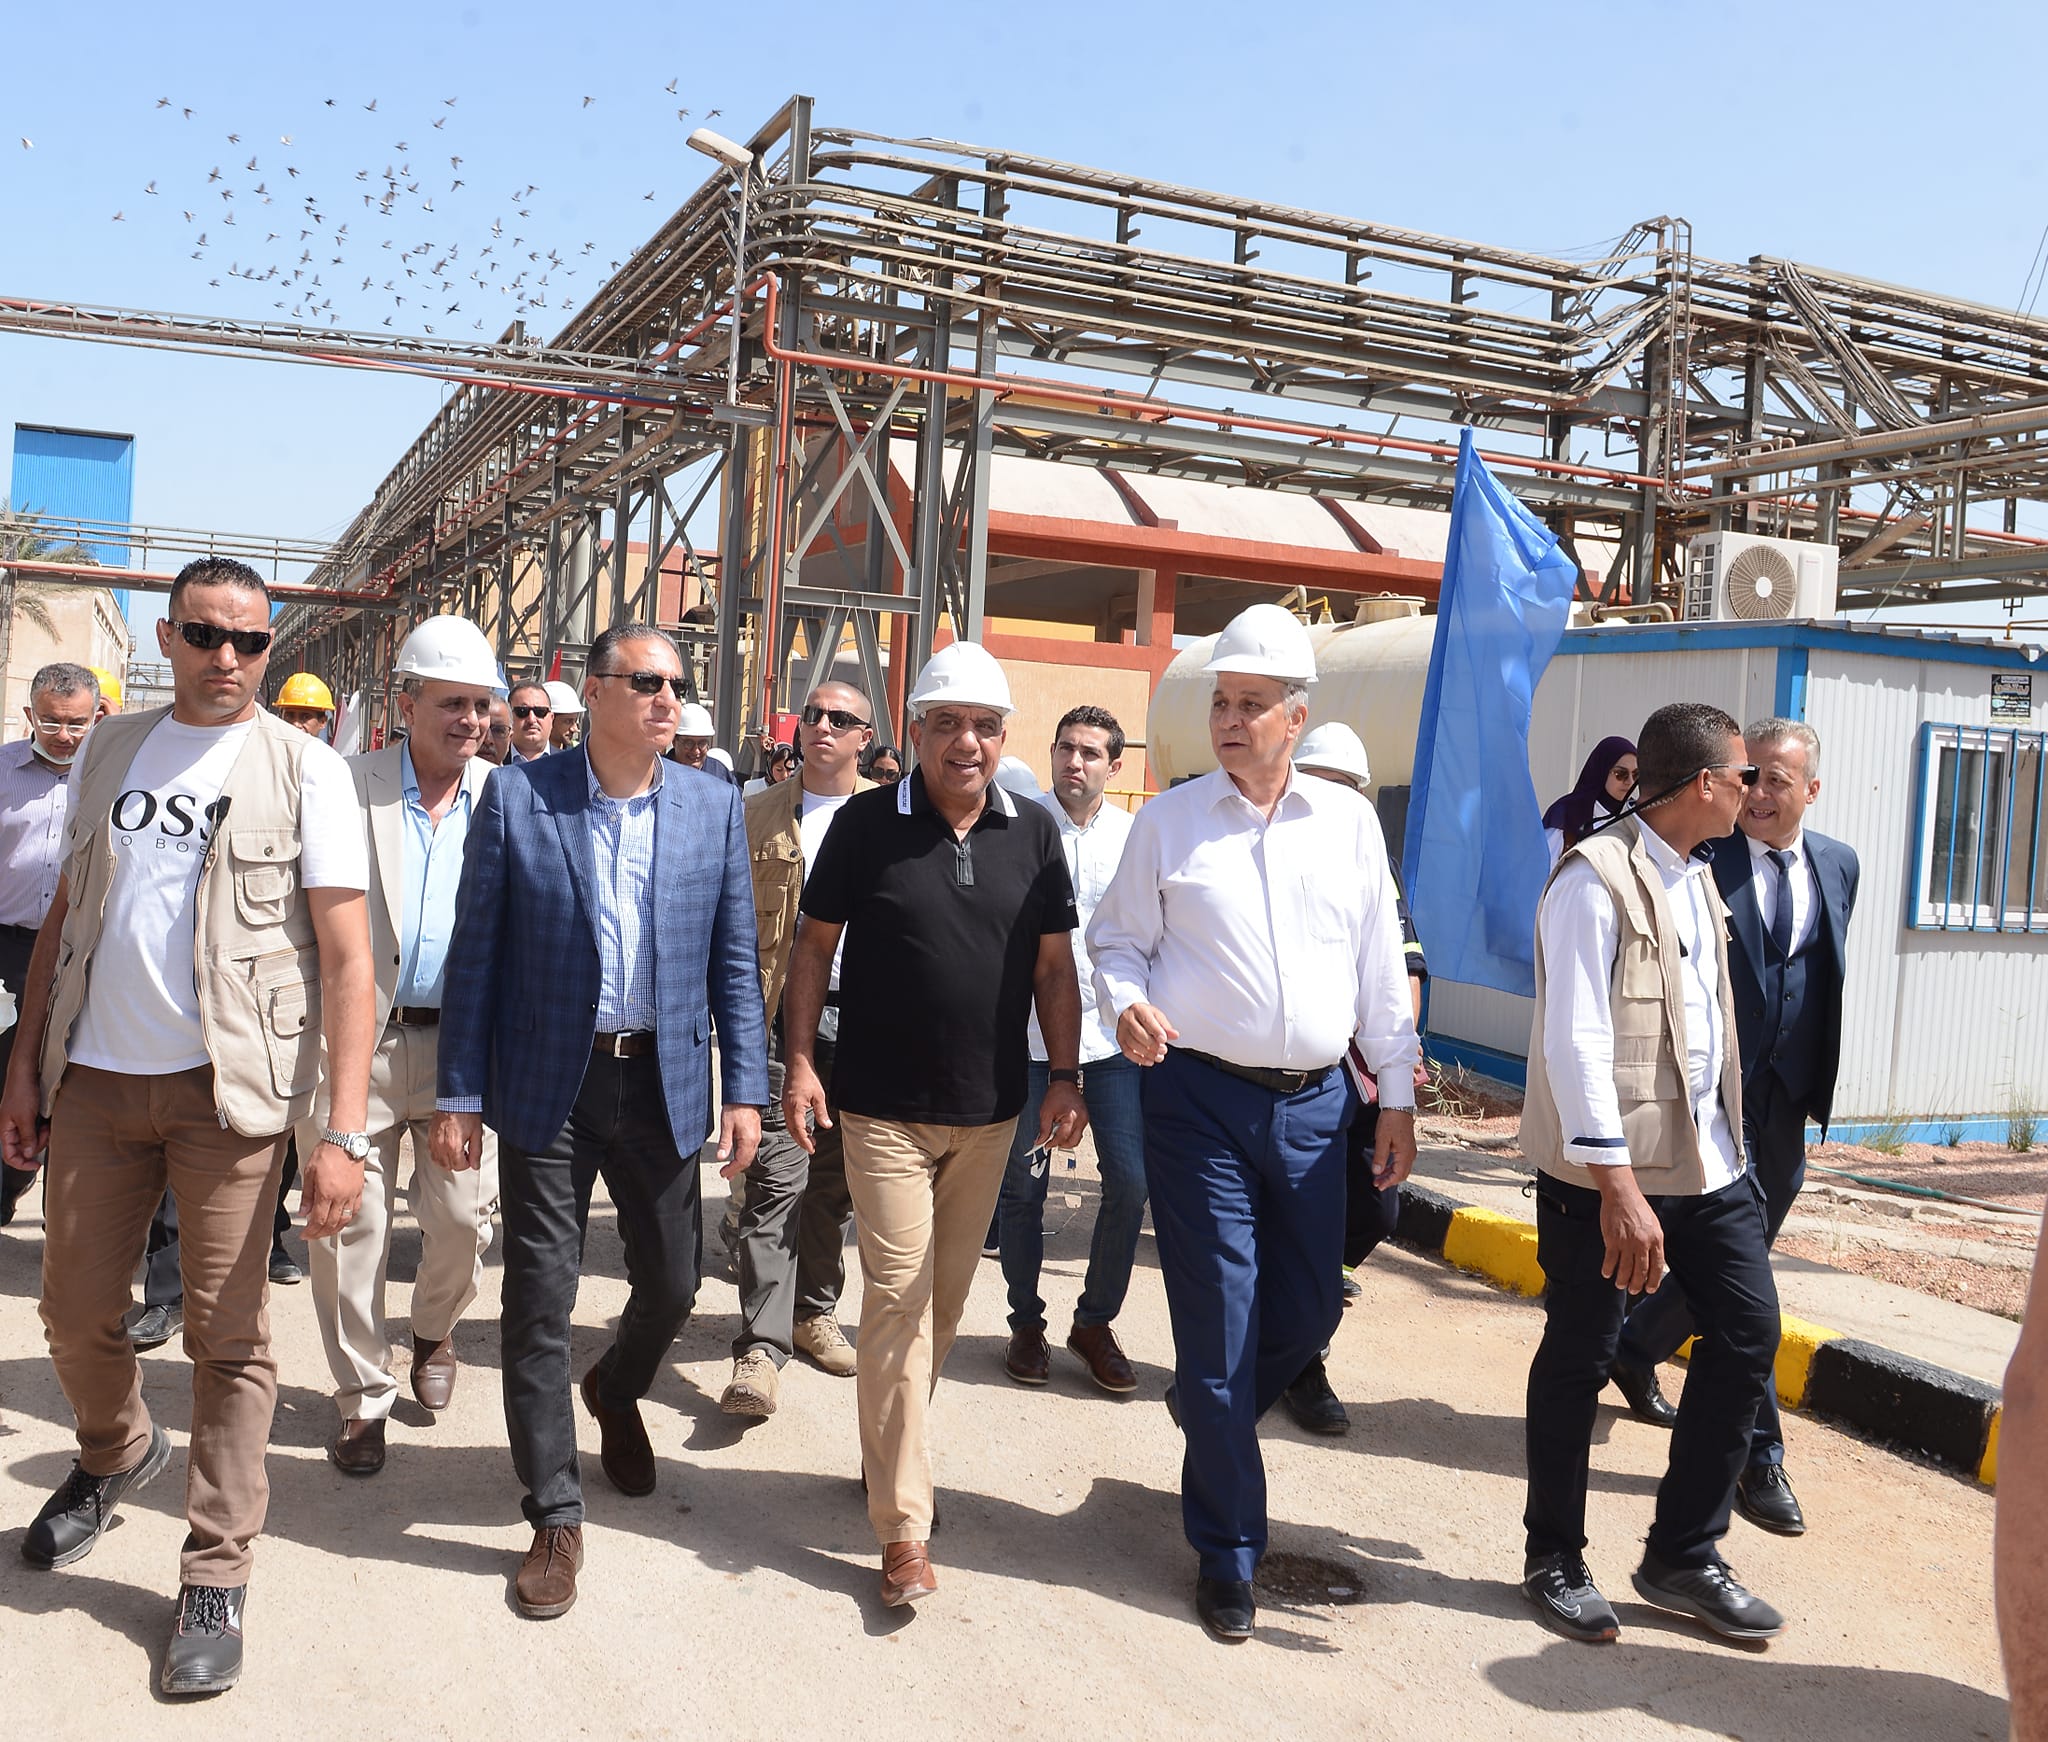  The Minister of Public Business Sector inspects the Misr Chemical Industry Company in Alexandria He directs to increase production, raise its efficiency and strengthen partnership with the private sector
                                